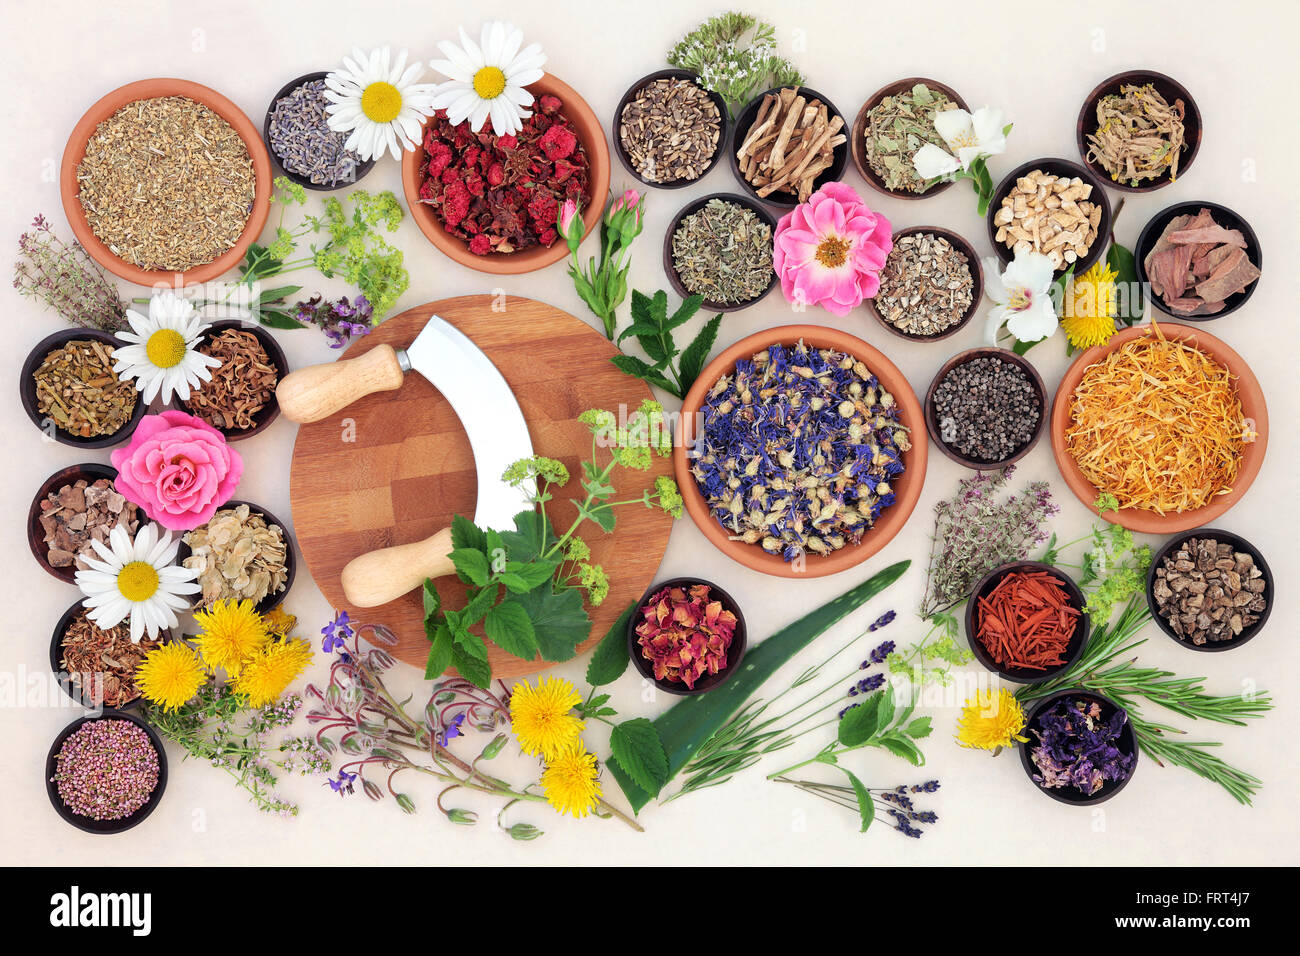 Natural flower and herb selection used in herbal medicine over speckled handmade cream paper background. Stock Photo